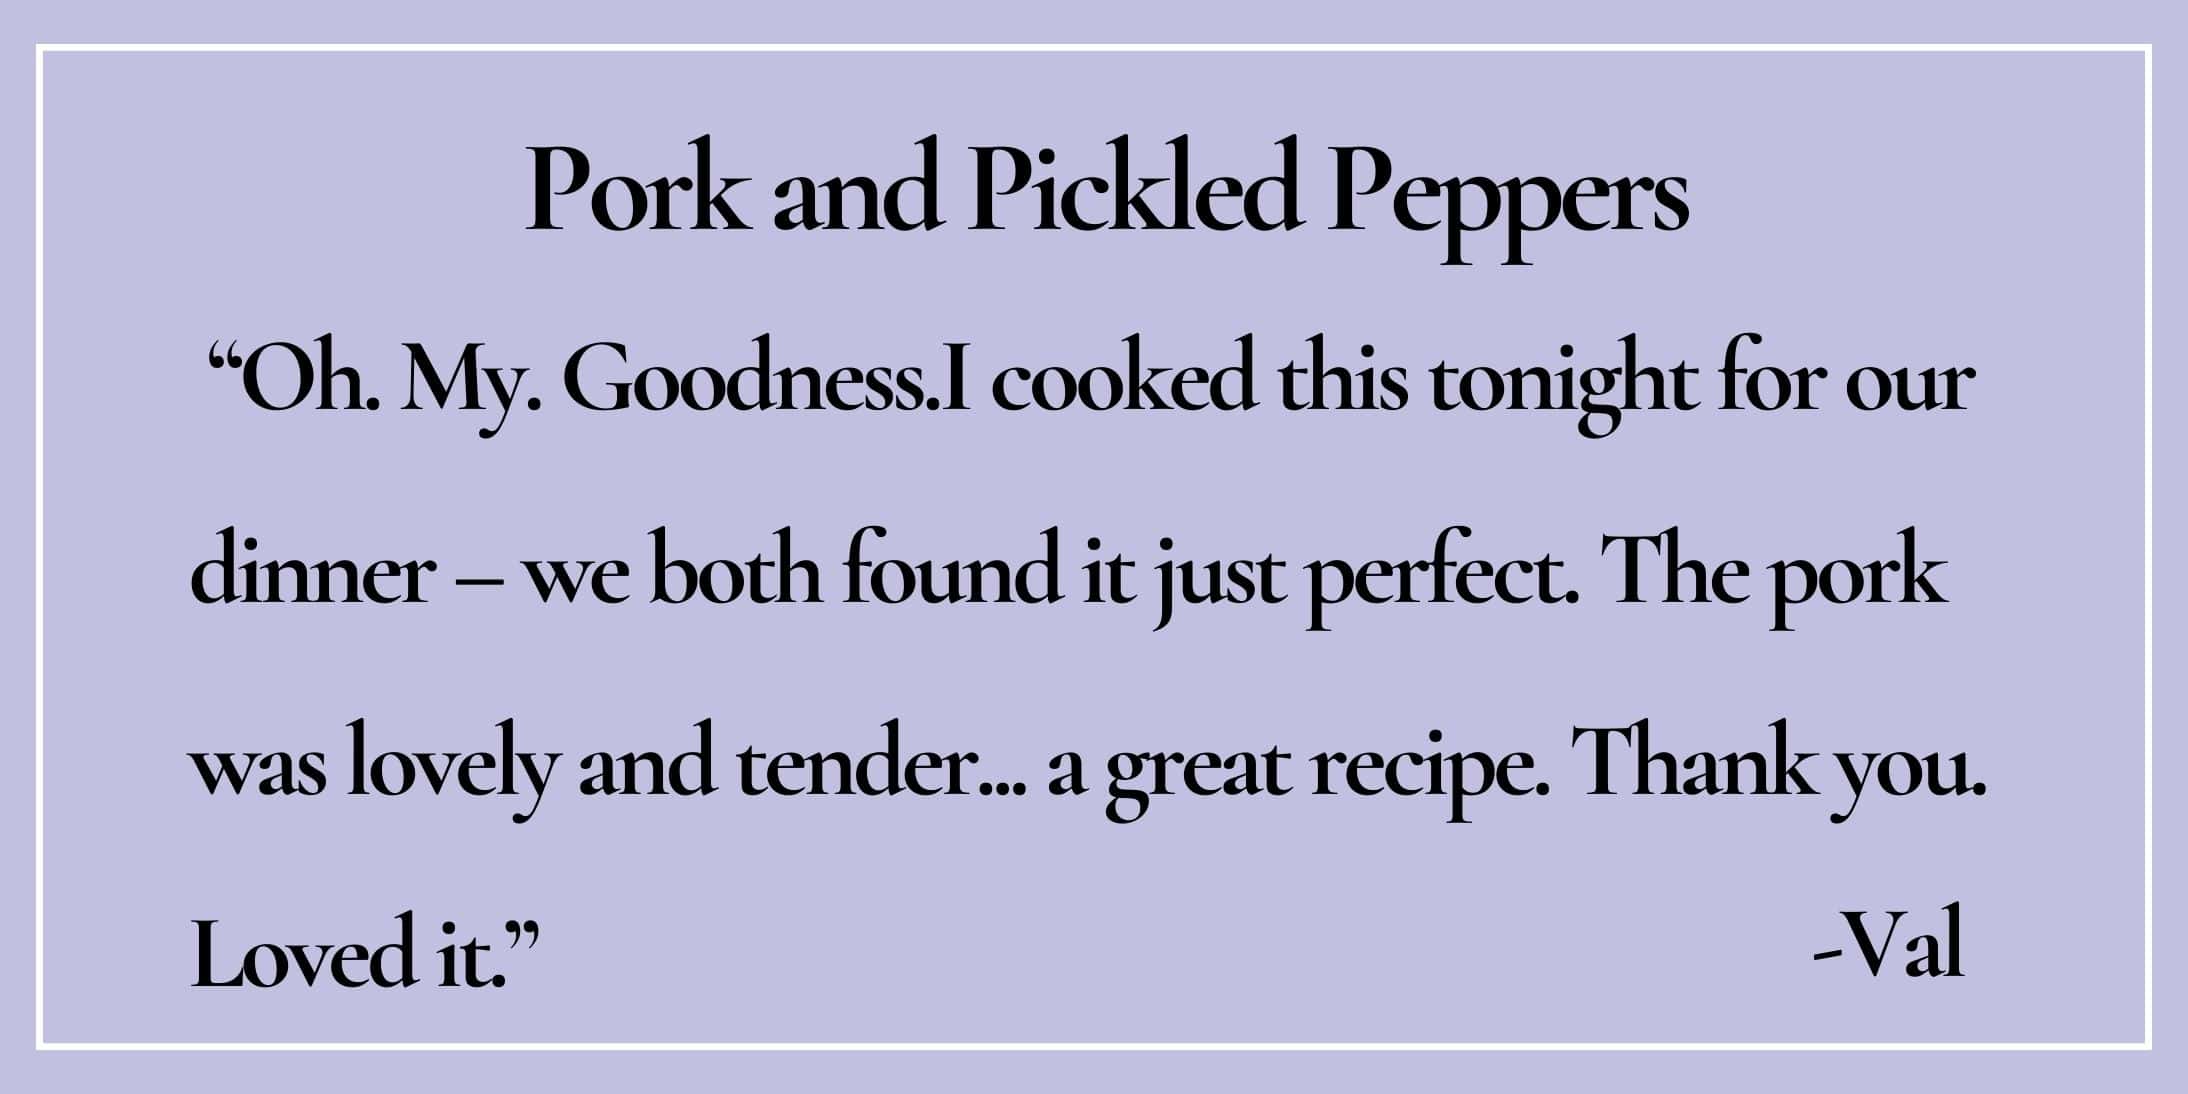 text box with paraphrase: The pork was lovely and tender... a great recipe. Thank you. Loved it. -Val